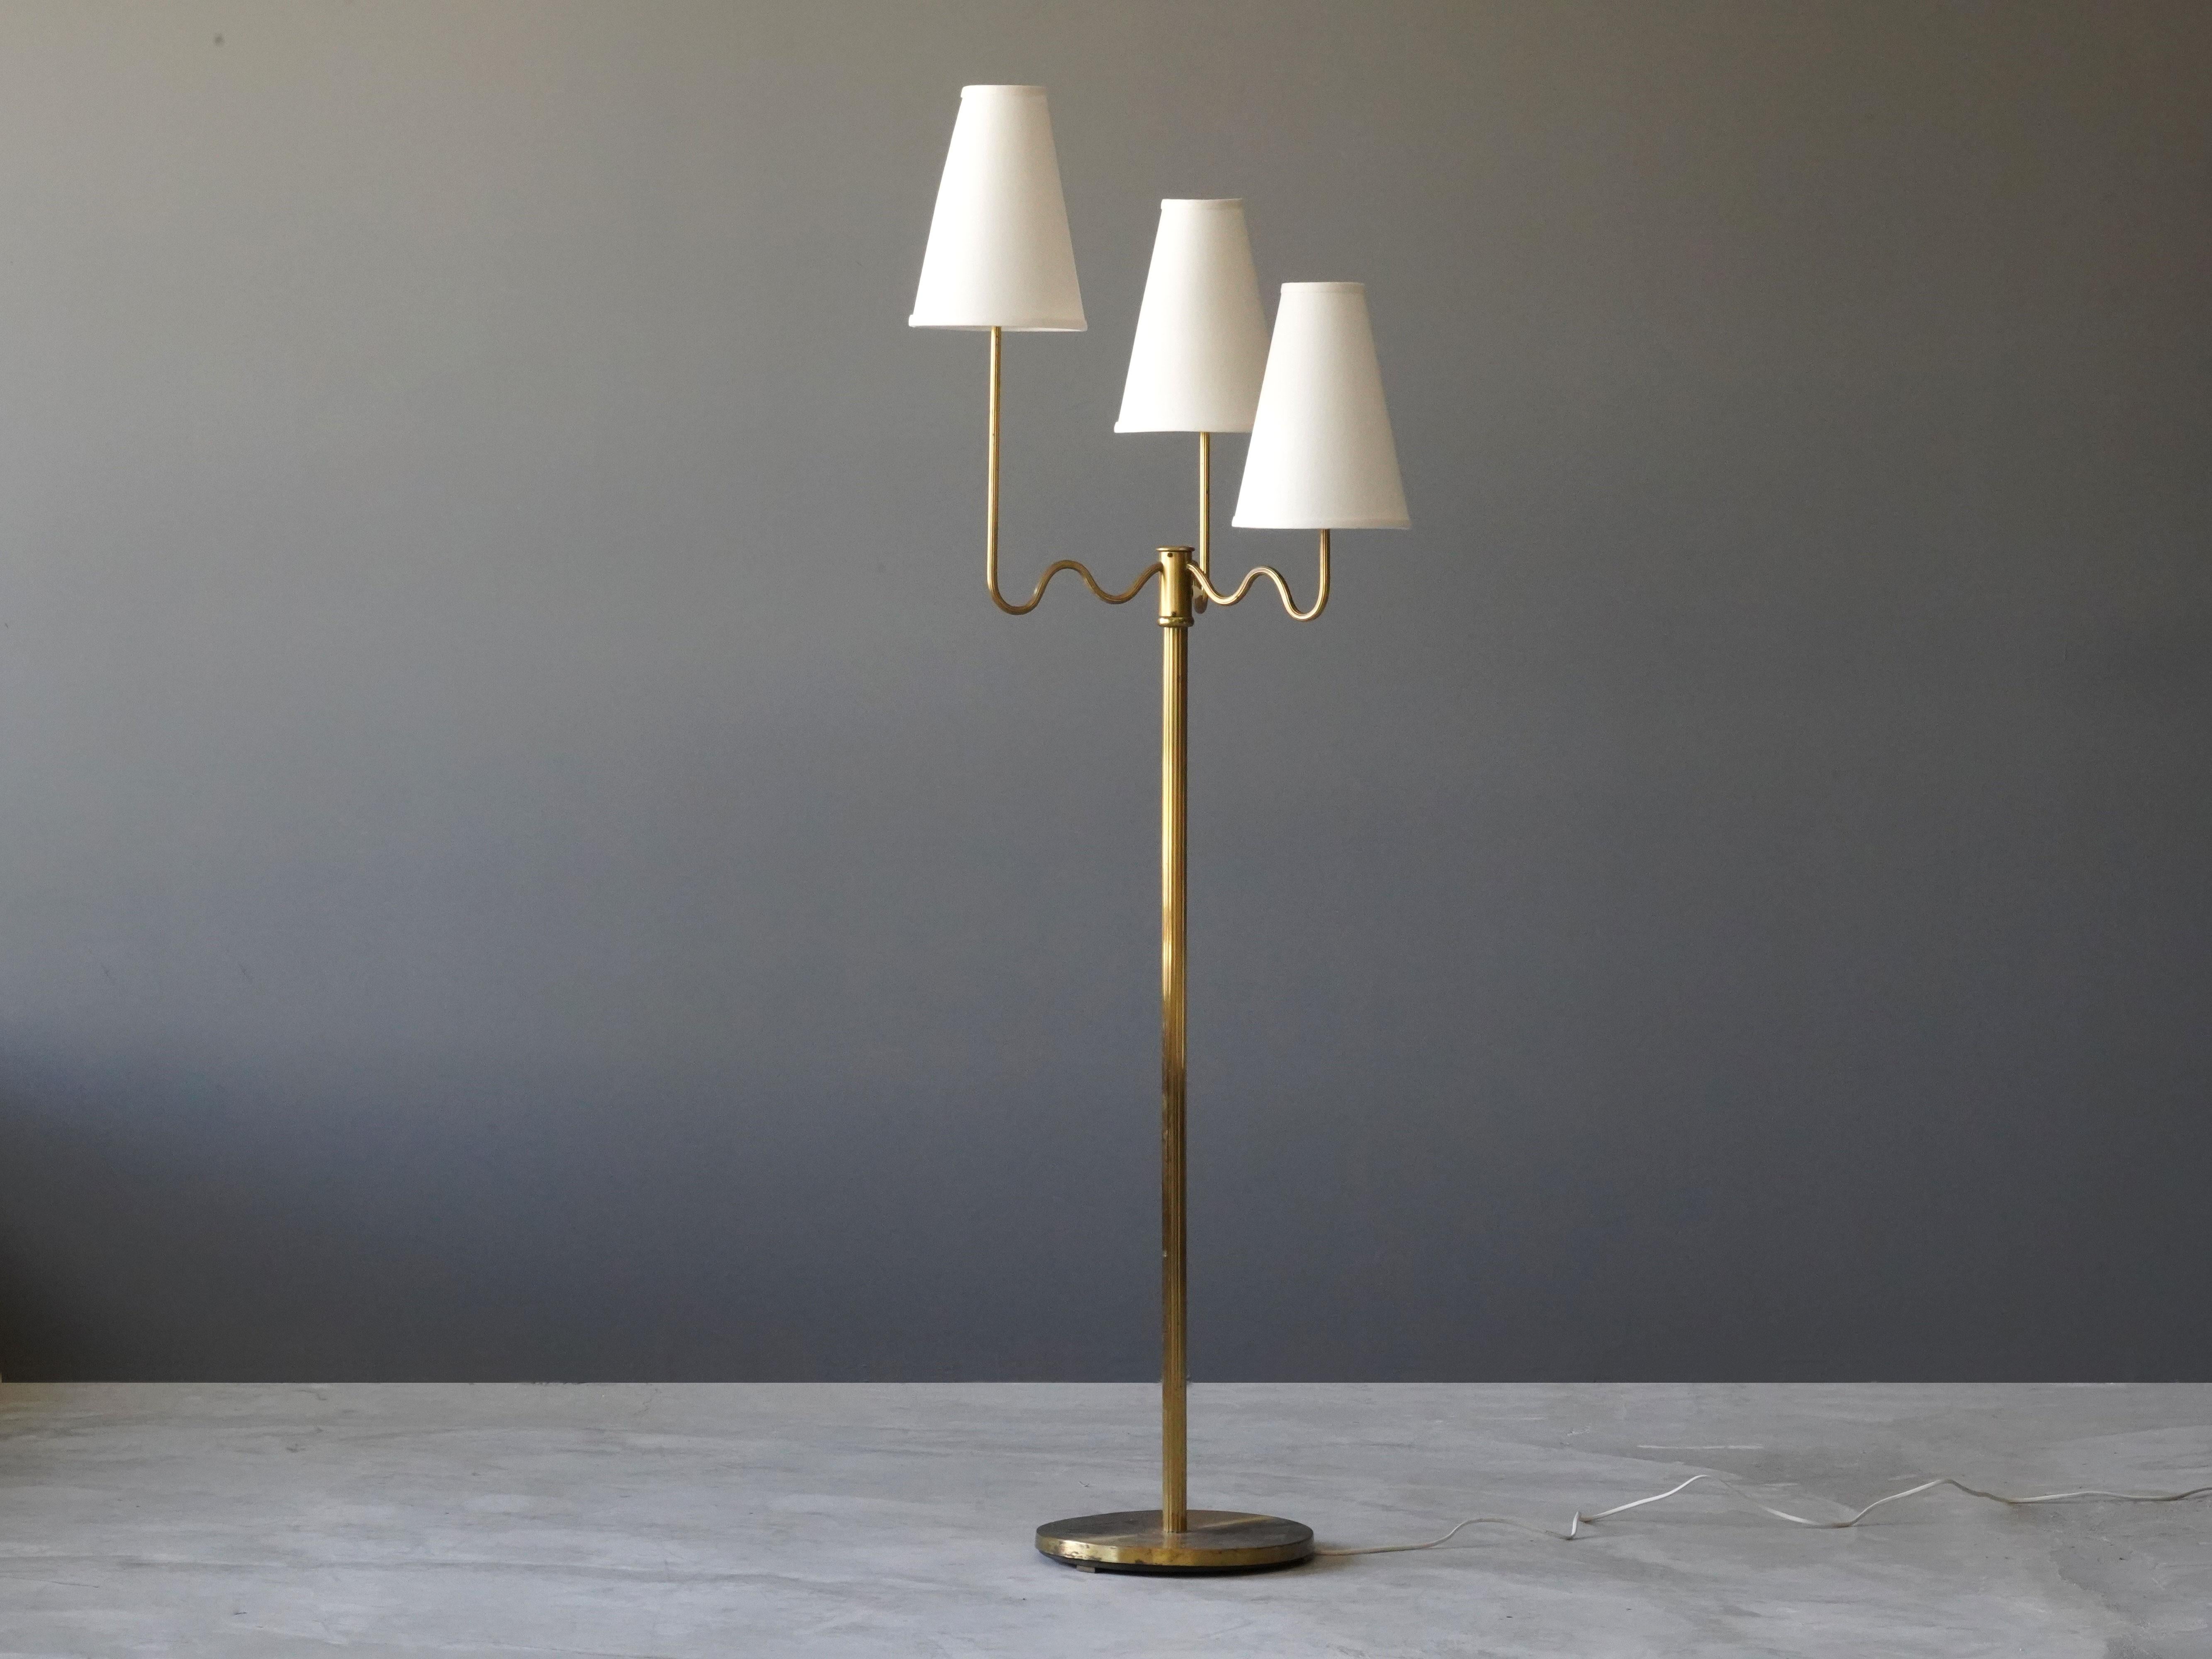 An organic three-armed floor lamp. Designed by an unknown Swedish modernist designer, circa 1930s. 

Other designers working in the organic style include Jean Royere, Gio Ponti, Vladimir Kagan, Ico Parisi, and George Nakashima.